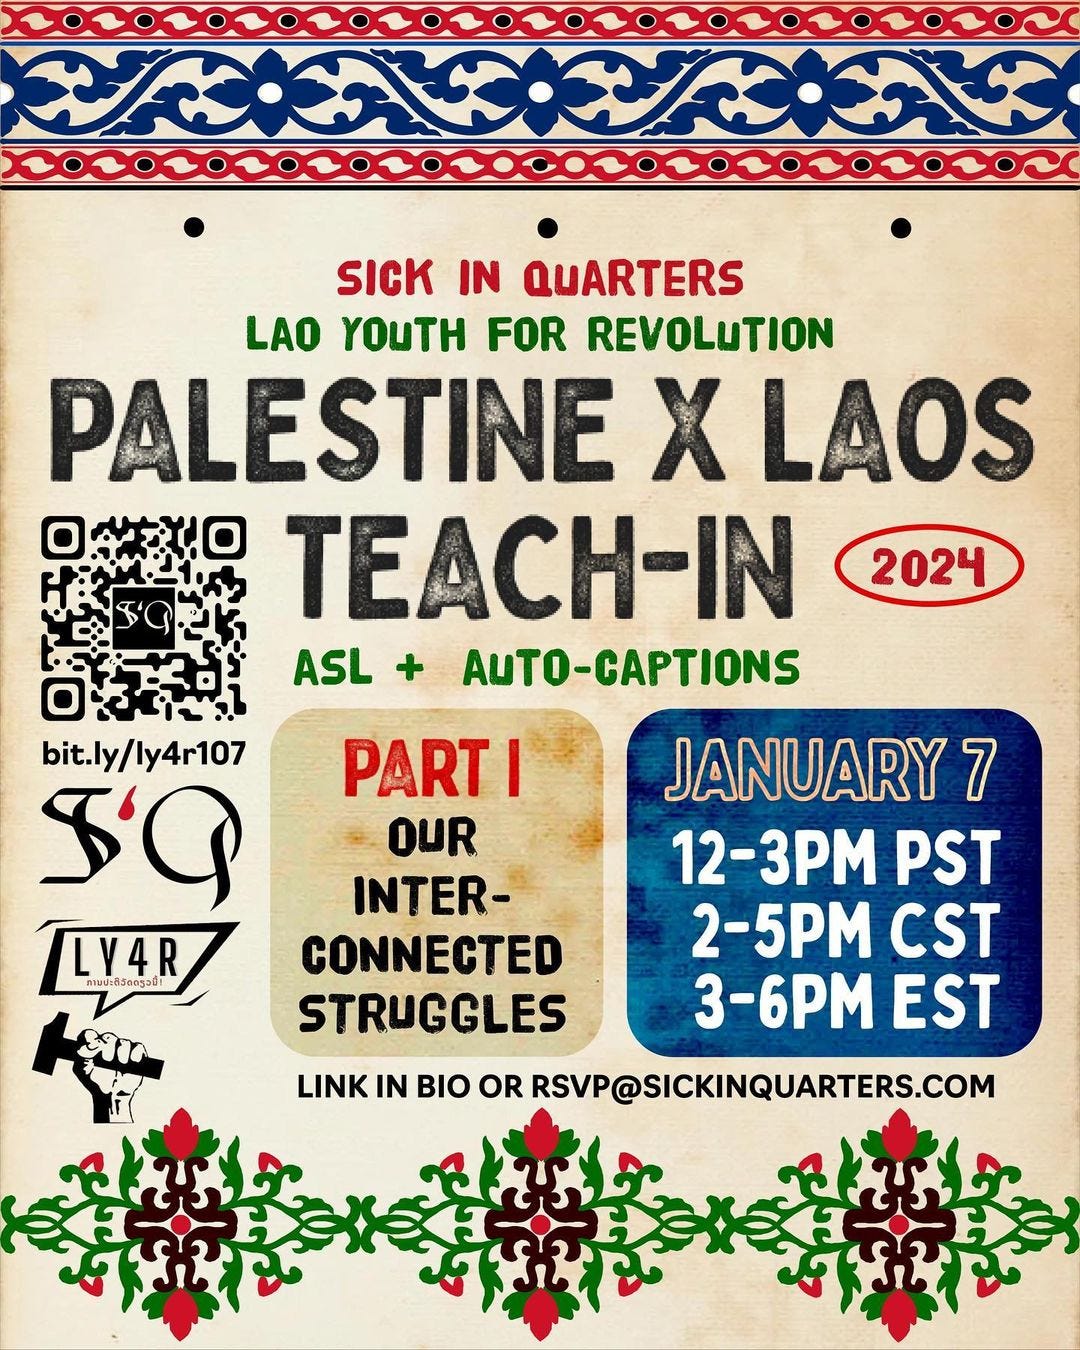 event announcement poster with an aged light paper background. Centered in the body of the poster is event information in alternating red, green, and black text in all caps woodblock stamp-style font.  The text reads from the top down, with forward slashes to indicate a new line : SICK IN QUARTERS / LAO YOUTH FOR REVOLUTION / PALESTINE X LAOS TEACH-IN 2024 ASL + AUTO-CAPTIONS [end text]. Nested beside this text is a black QR code that leads to the RSVP form when scanned, followed by the shortlink for the same form : bit.ly/ly4r107 (all lowercase). Underneath is SiQ and LY4R’s logos in black and red.  Toward the right are two text boxes, one in darker aged paper-tone and the other in indigo fabric that contain further event details. In the aged paper-tone box is the text : PART 1 / OUR INTER-/ CONNECTED / STRUGGLES. In the indigo fabric box : JANUARY 7 / 12-3PM PST / 2-5PM CST / 3-6PM EST. Beneath these two text boxes is small all caps black text that reads : LINK IN BIO OR RSVP@SICKINQUARTERS.COM.  Along the top edge of the poster is an indigo, red, black and white horizontal graphic border that references Lao sinh skirt hems, with a repeated four-point flower, vine, and chainlink pattern. Along the bottom edge is an emerald green, red and black horizontal graphic border in 3 repeated sections that references Palestinian embroidered floral tatreez.